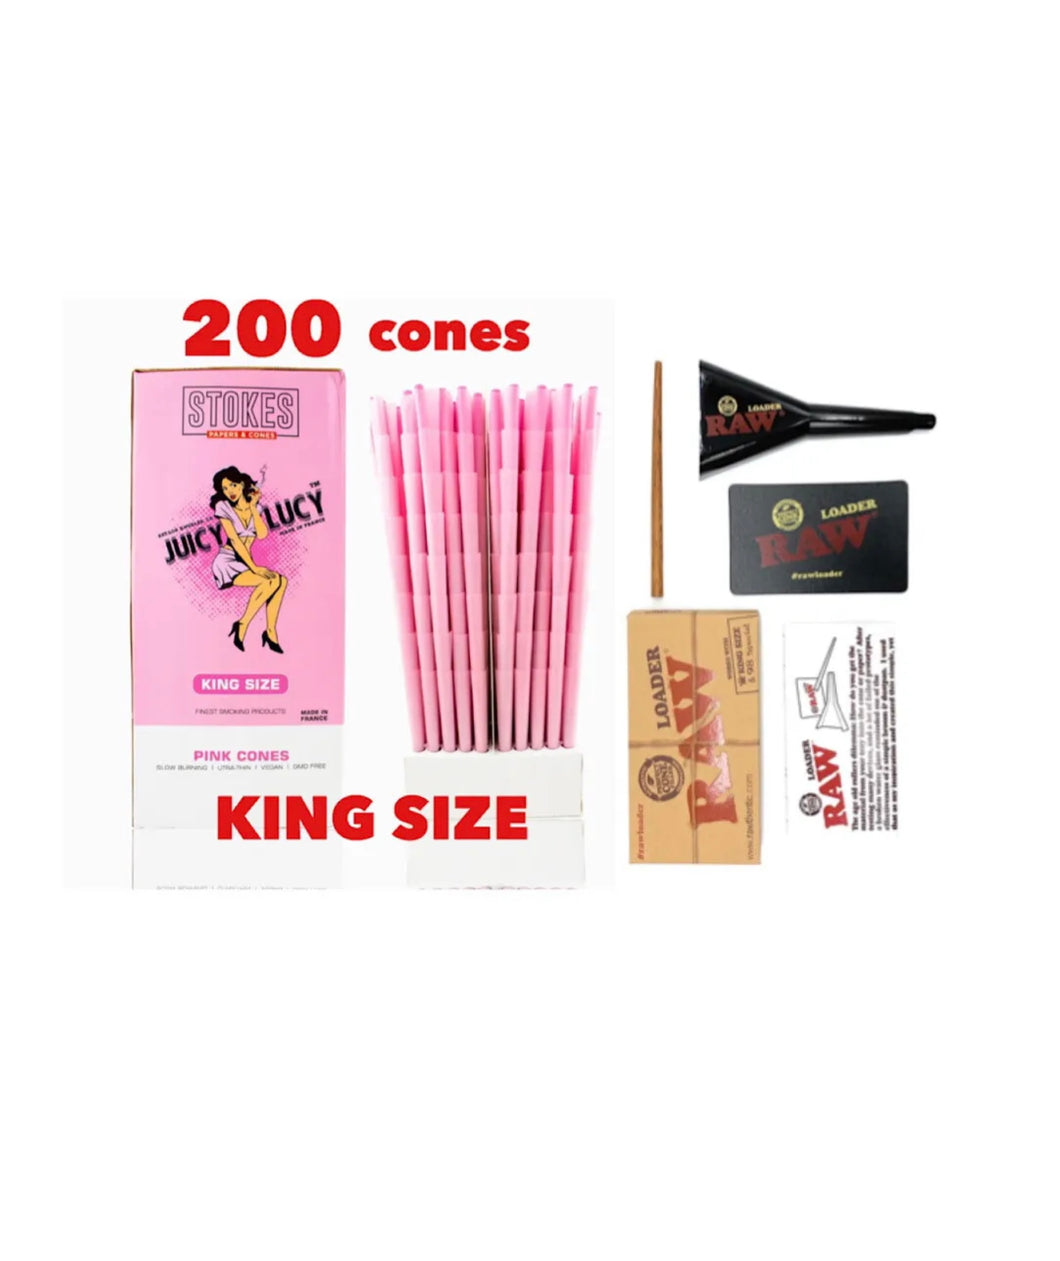 JUICY LUCY PINK cone KING size (200ct, 100ct 50ct) MADE IN FRANCE+RAW 98 king size loader